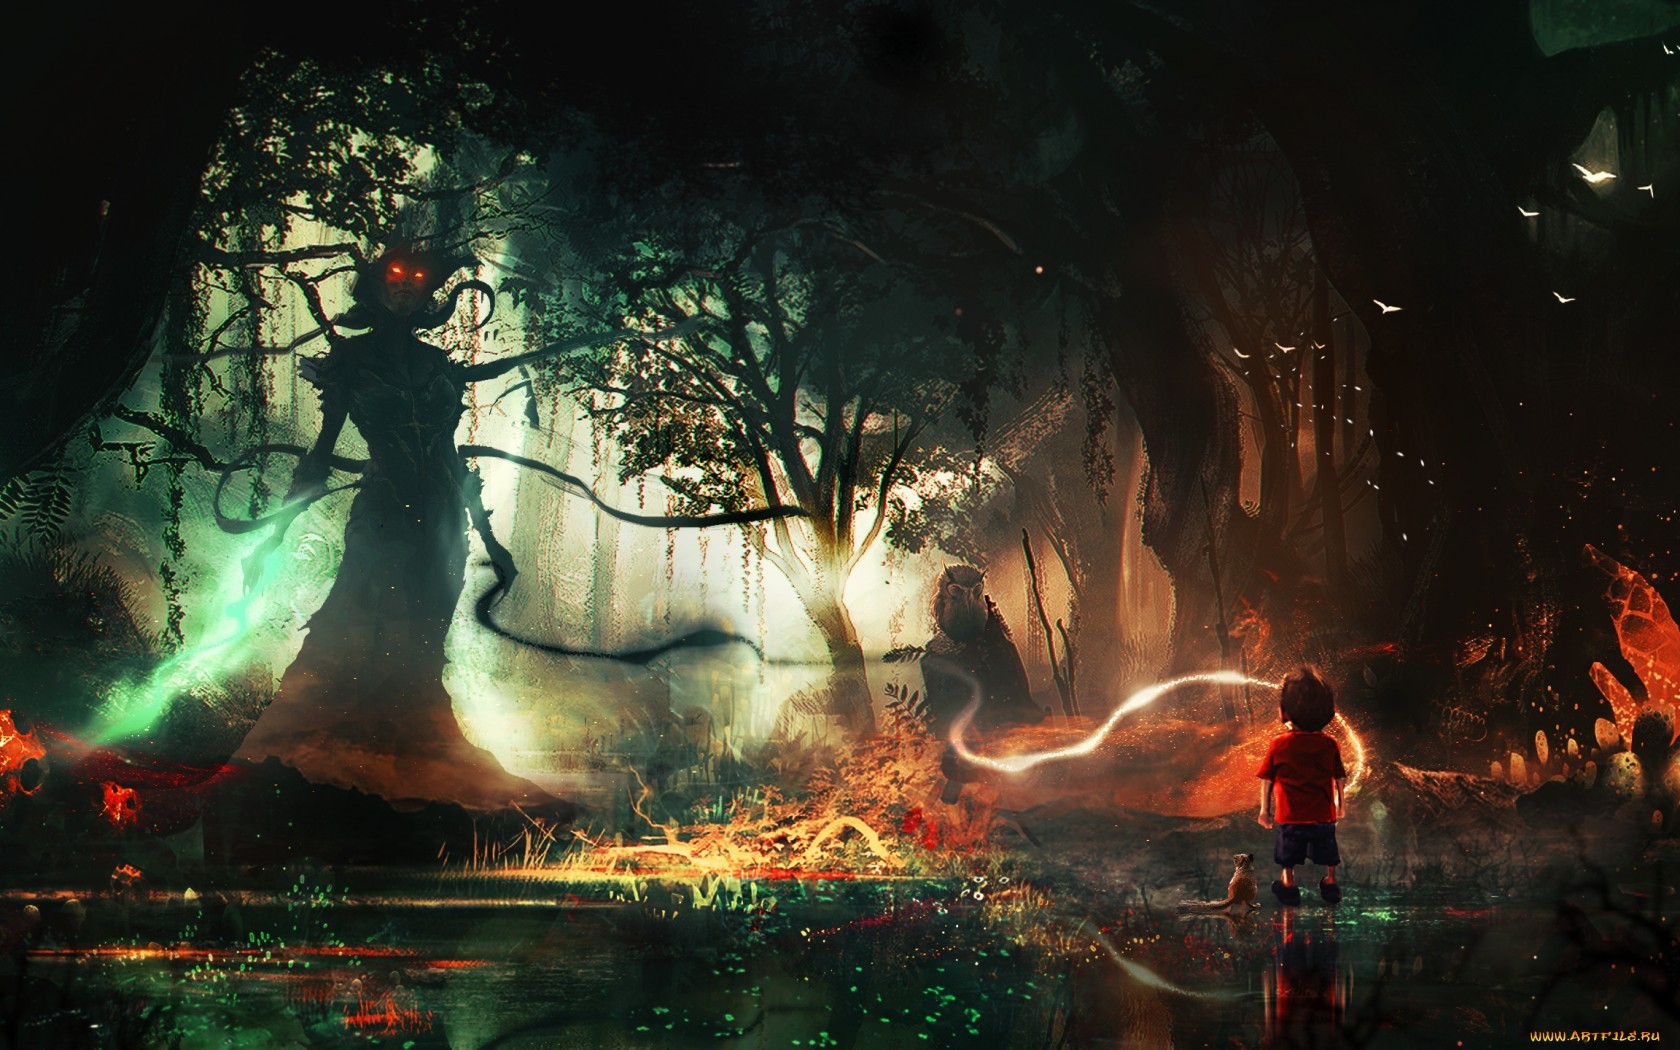 General 1680x1050 fantasy art watermarked red eyes forest nature children creature trees